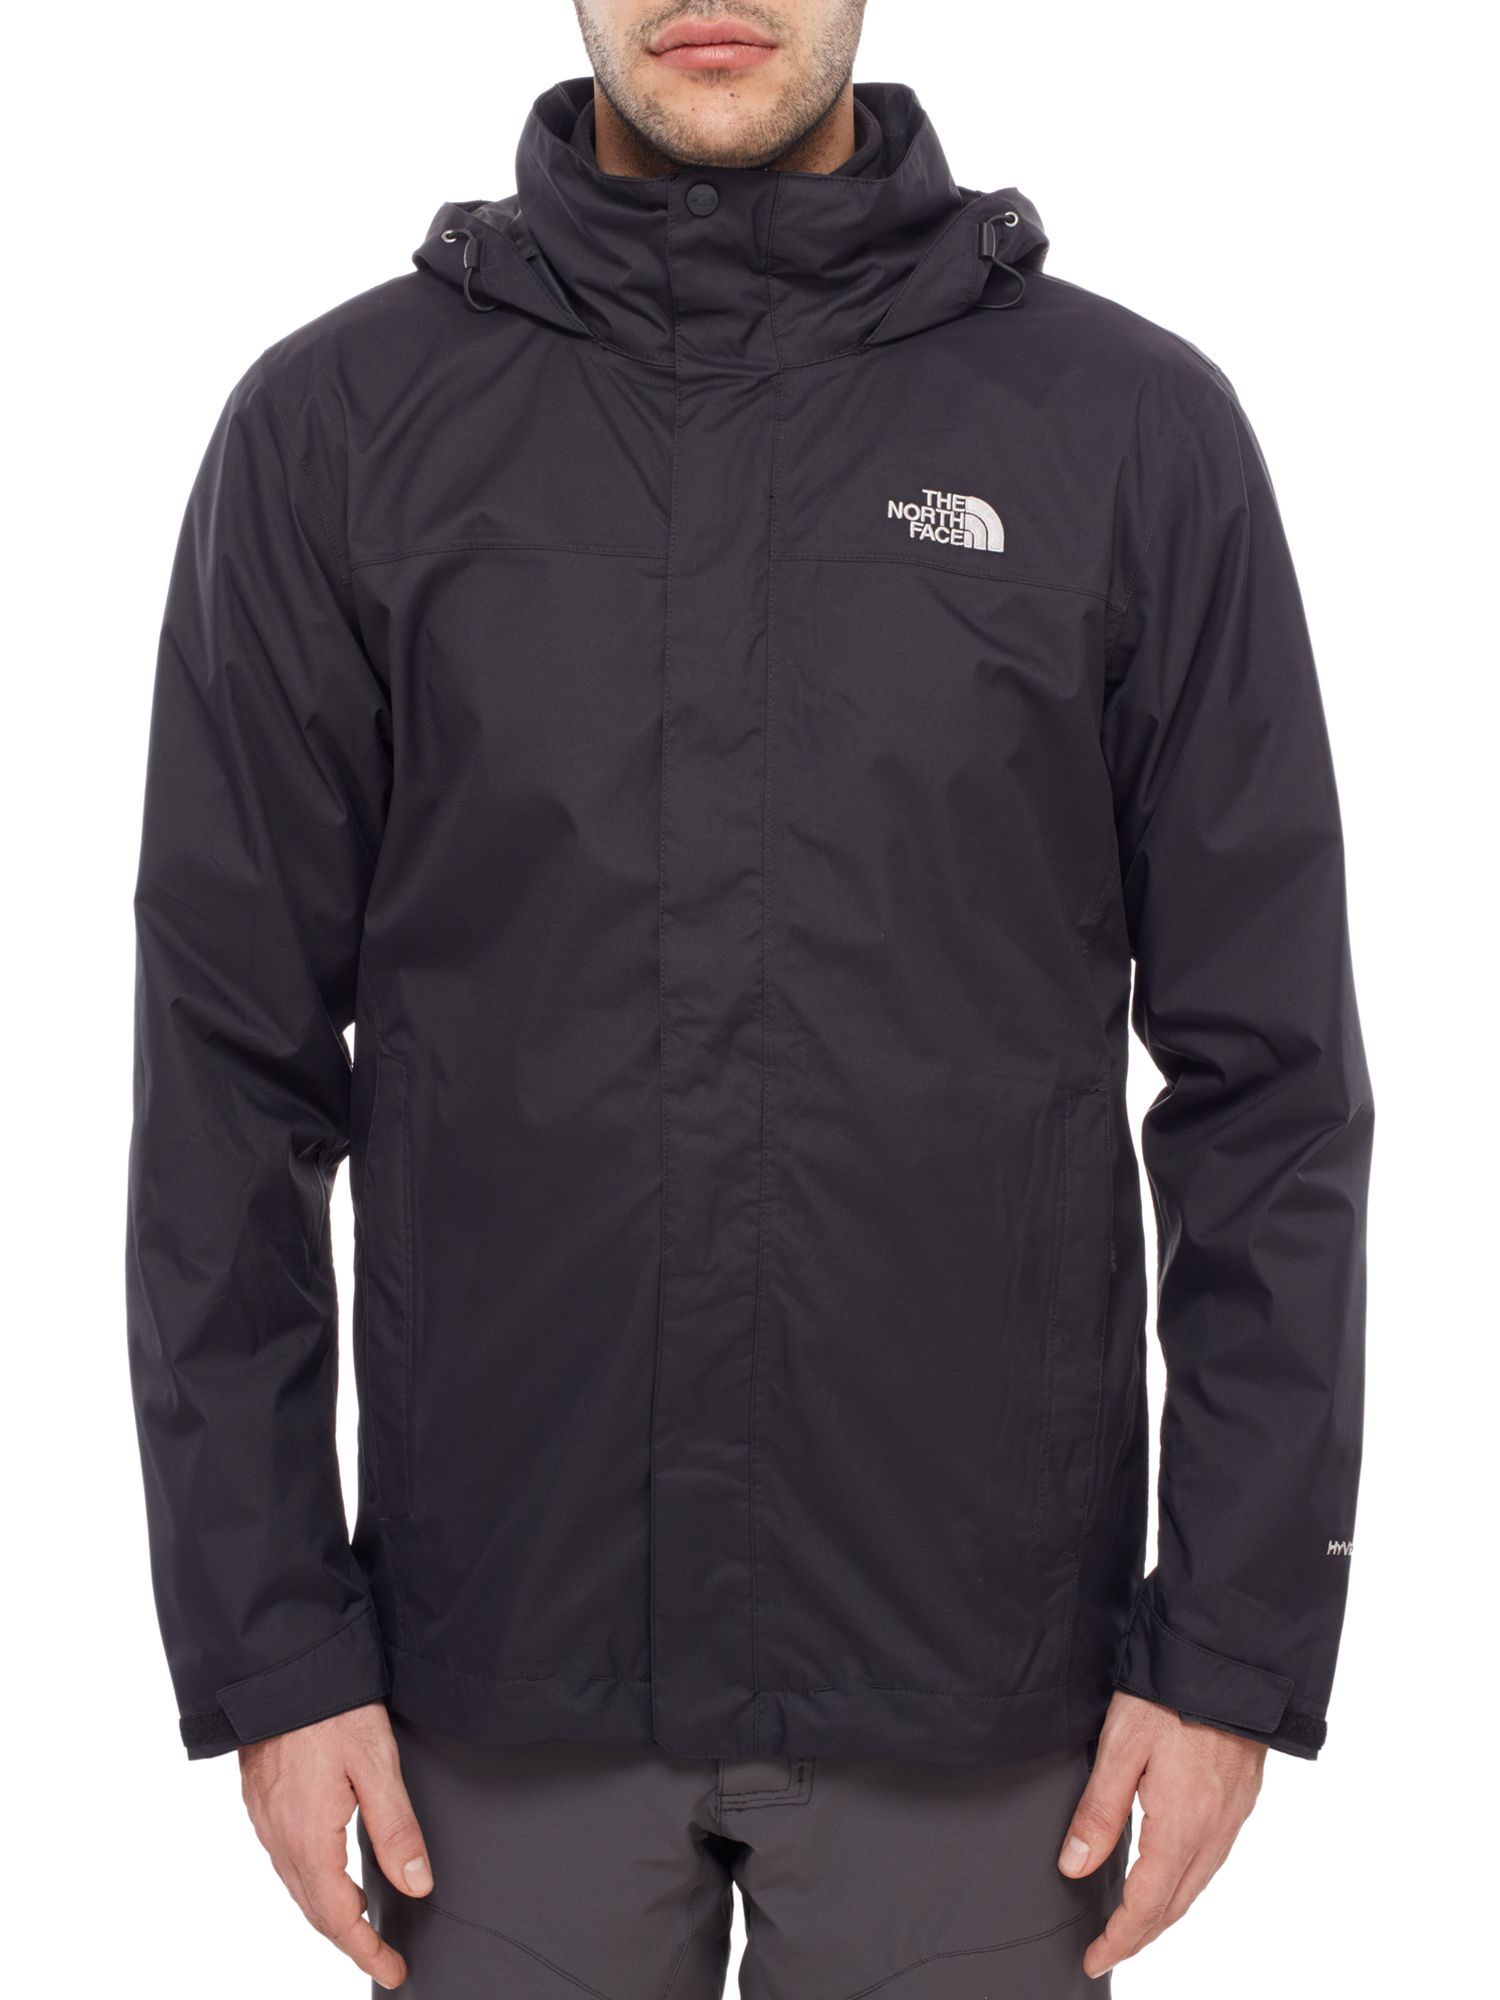 north face evolution triclimate jacket